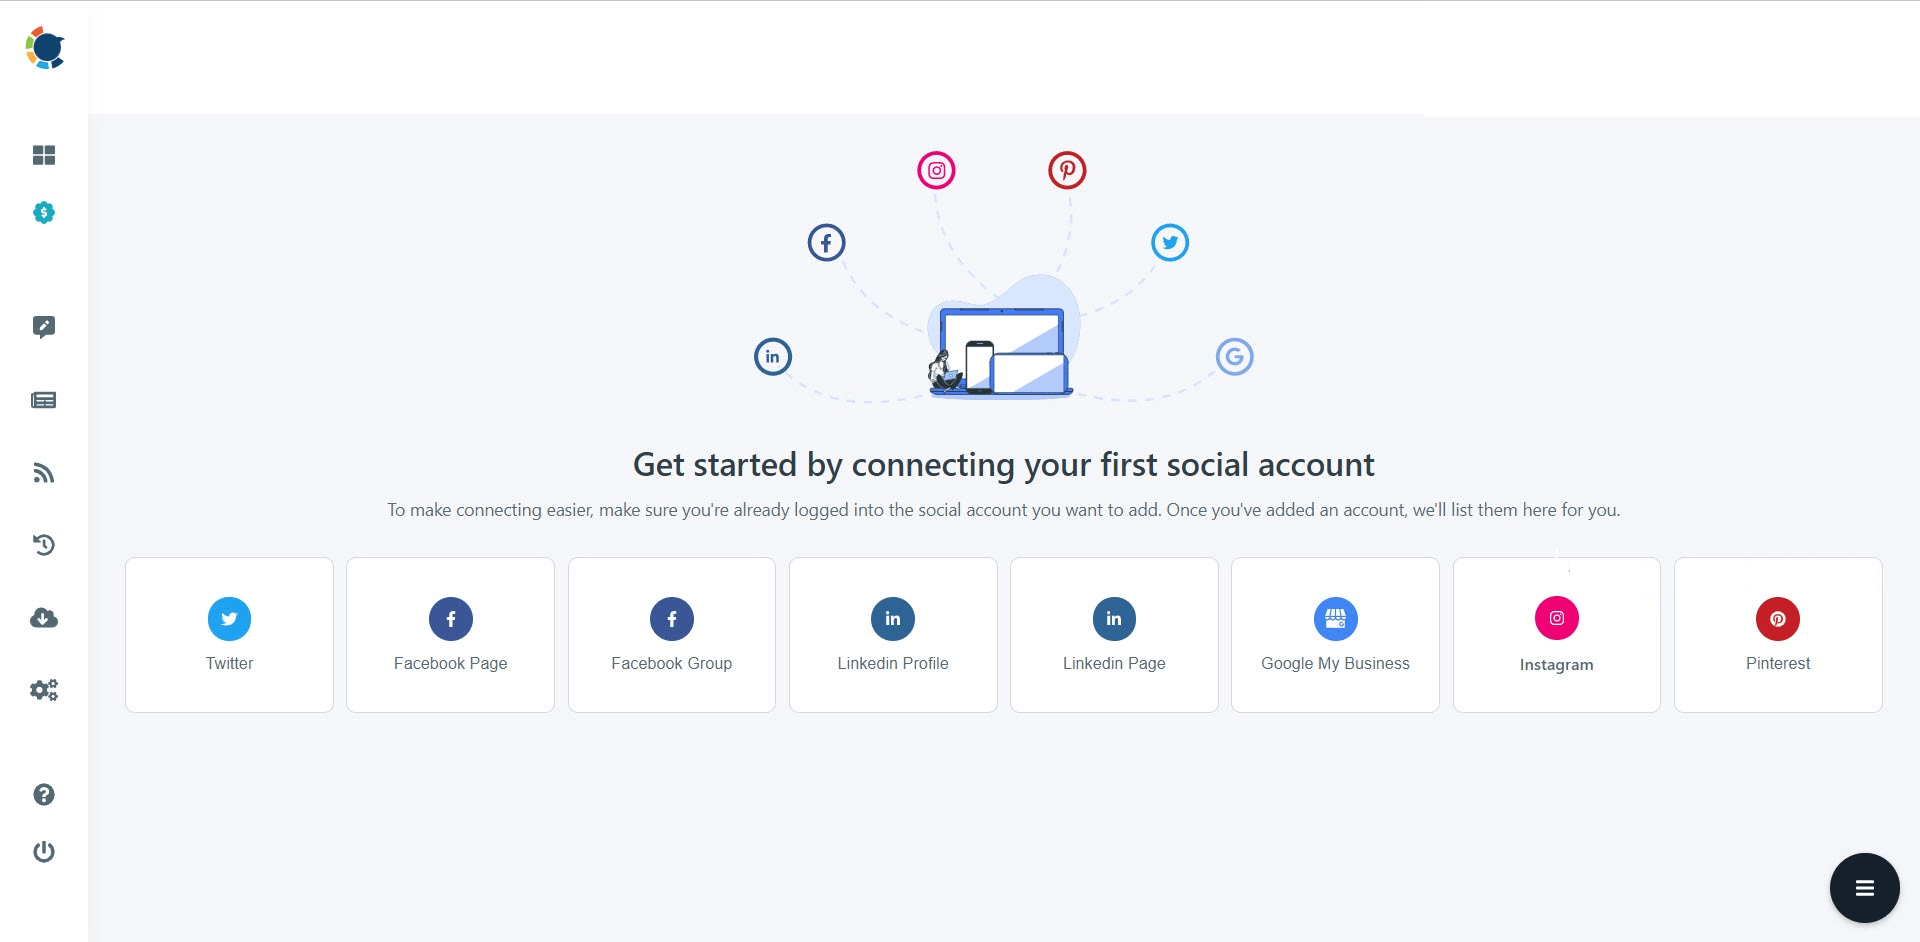 Circleboom Publish supports Twitter, Instagram, Facebook, Pinterest, LinkedIn, and Google Business Profile on the same dashboard.